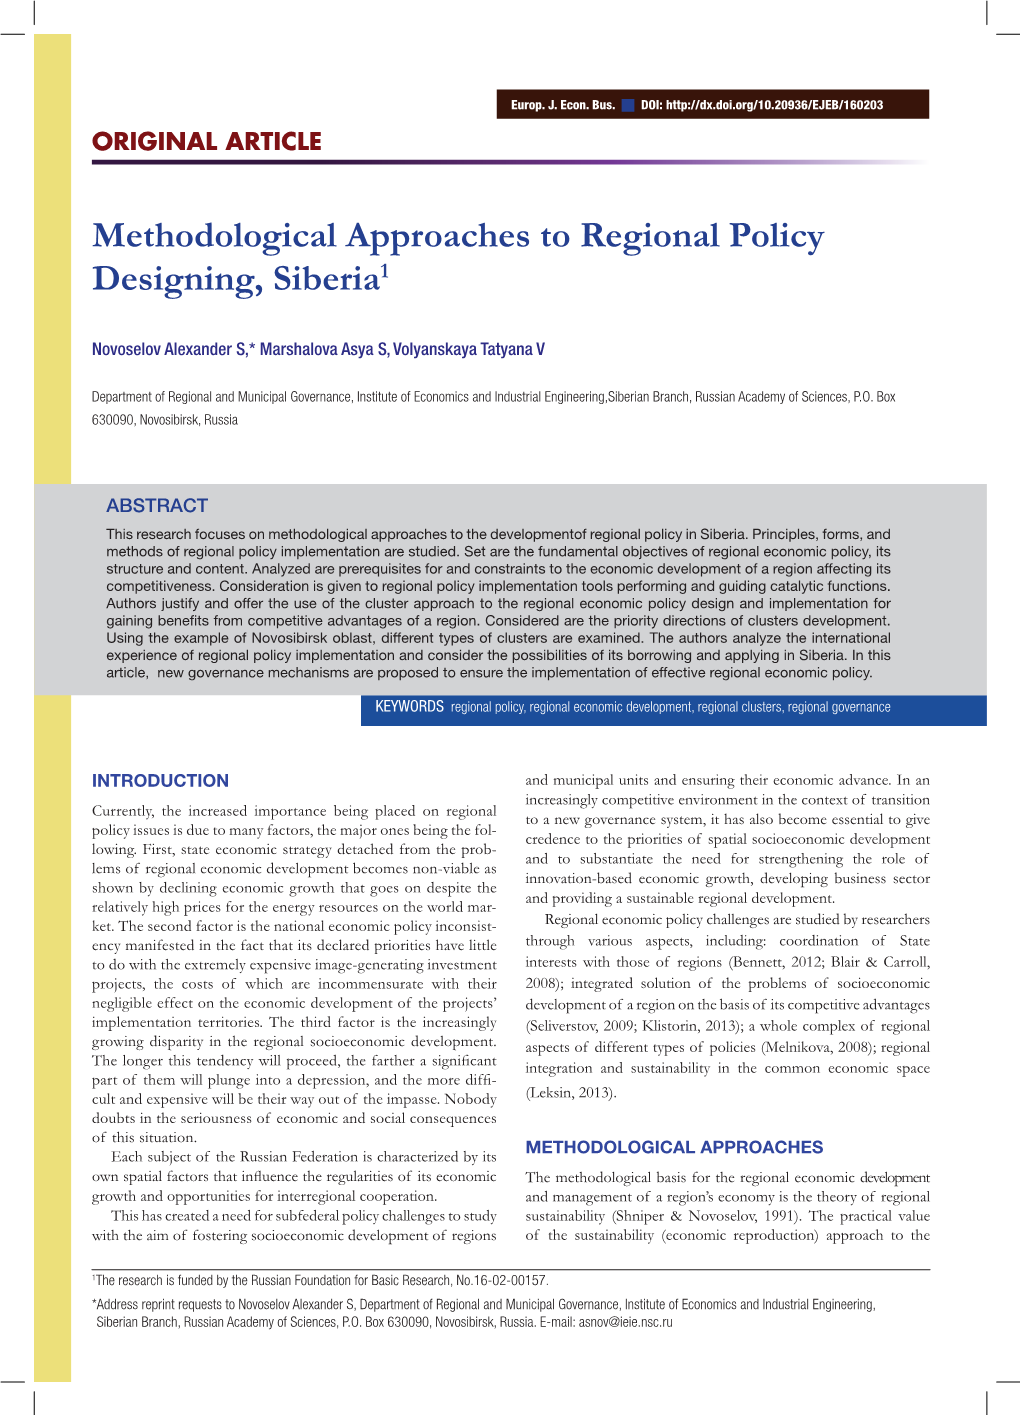 Methodological Approaches to Regional Policy Designing, Siberia1